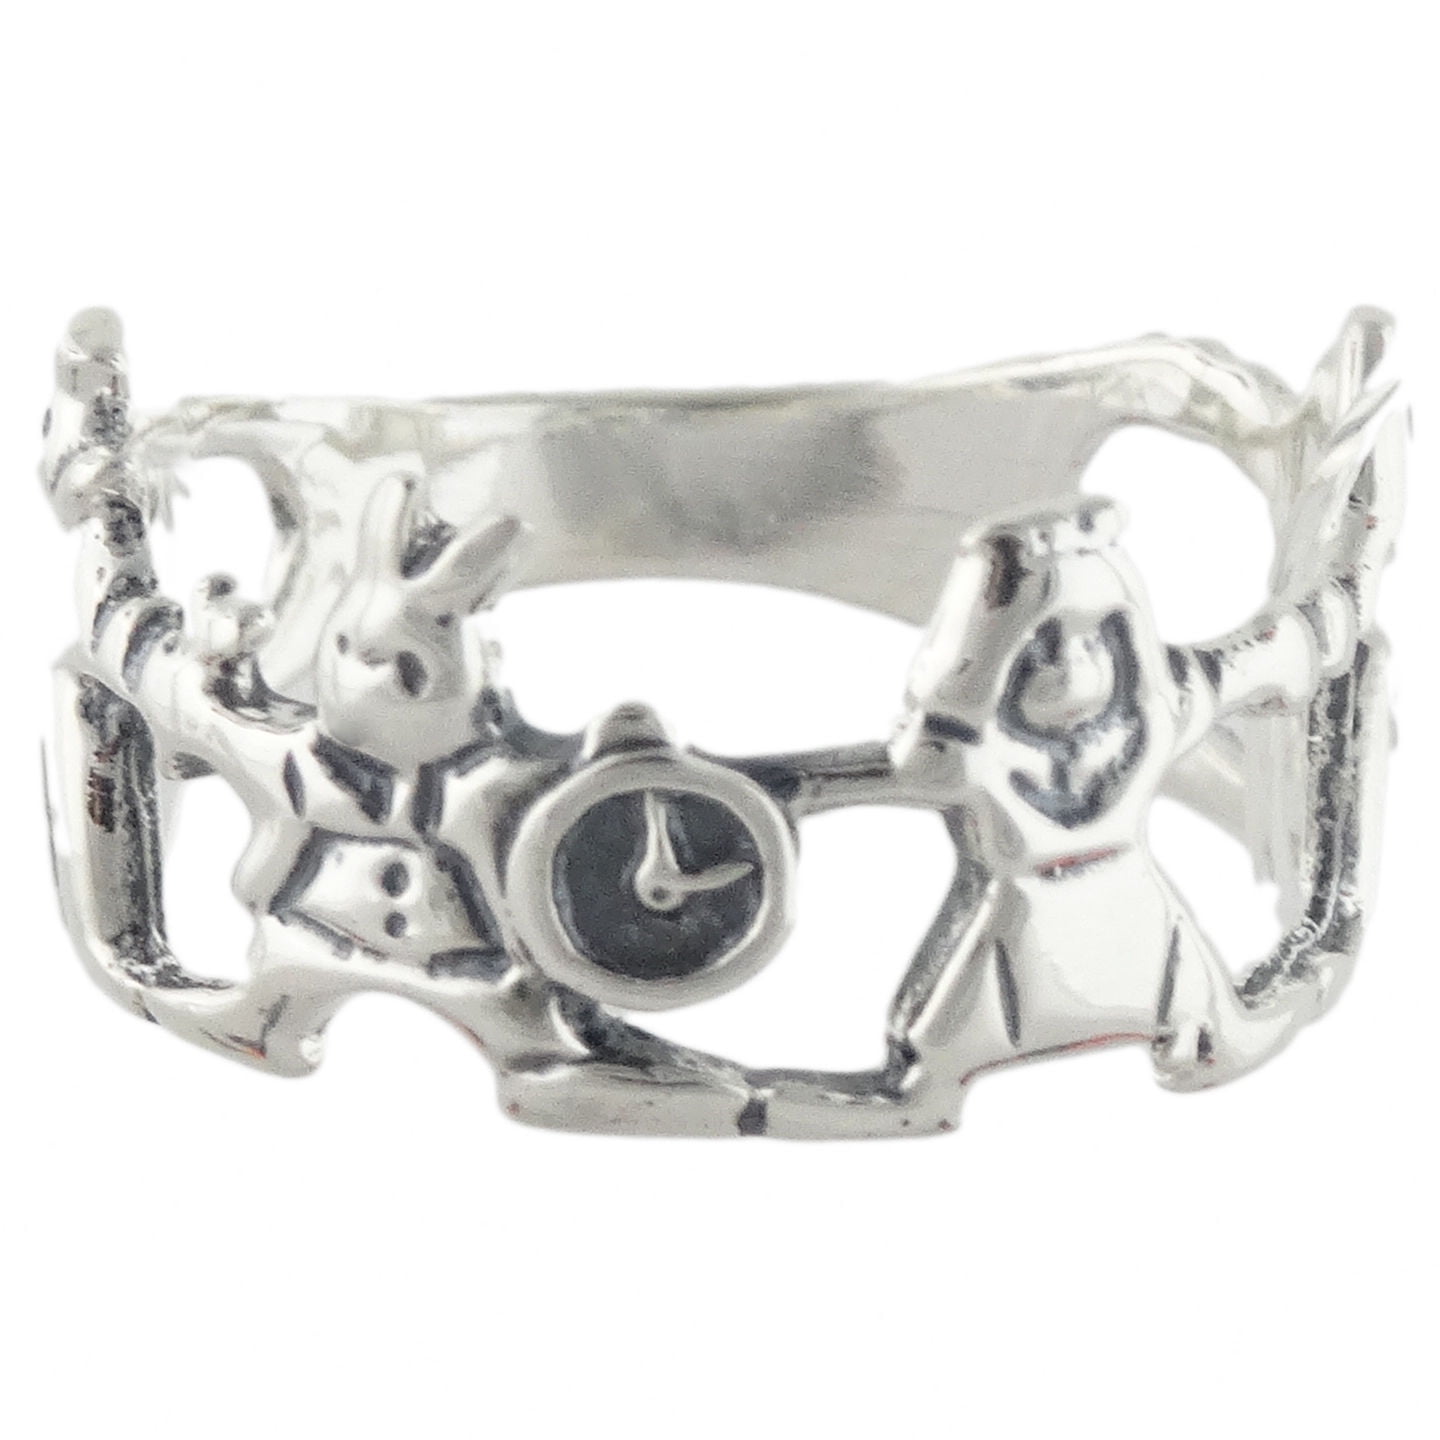 Sterling Silver Alice in Wonderland Ring with White Rabbit, Alice, Queen, Playing Card (6)